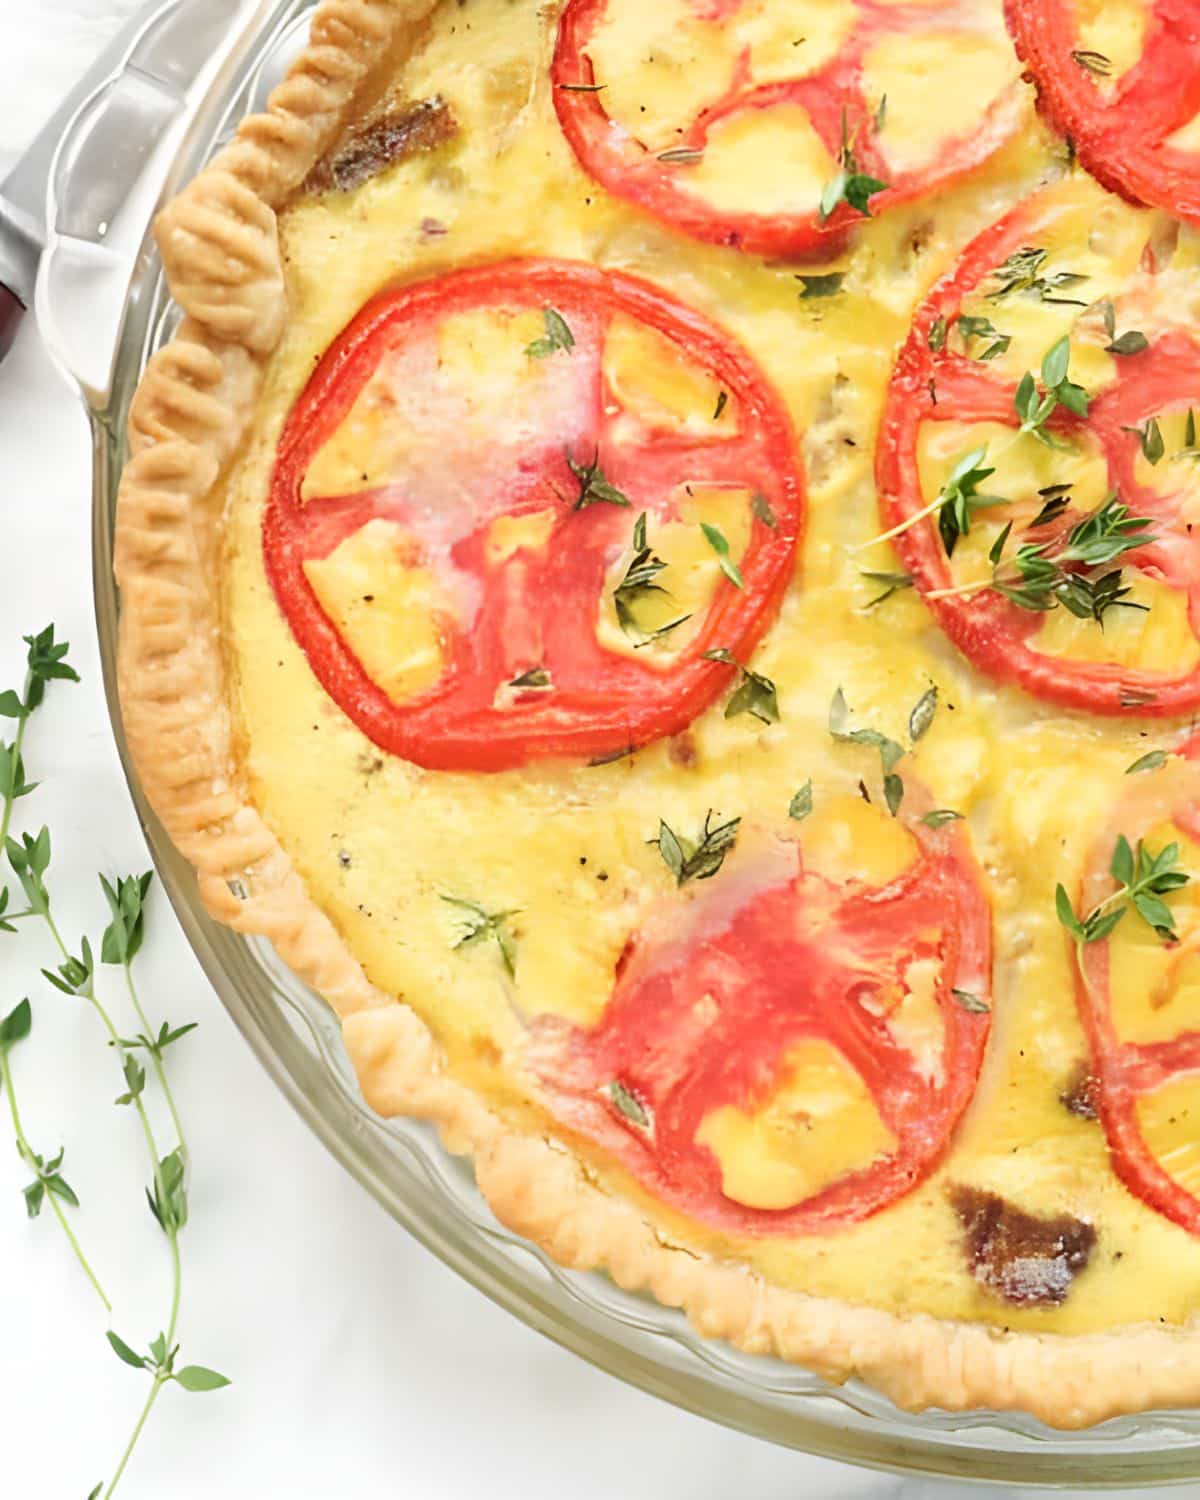 Tomato Bacon and Onion Quiche with herbs in a pie plate.